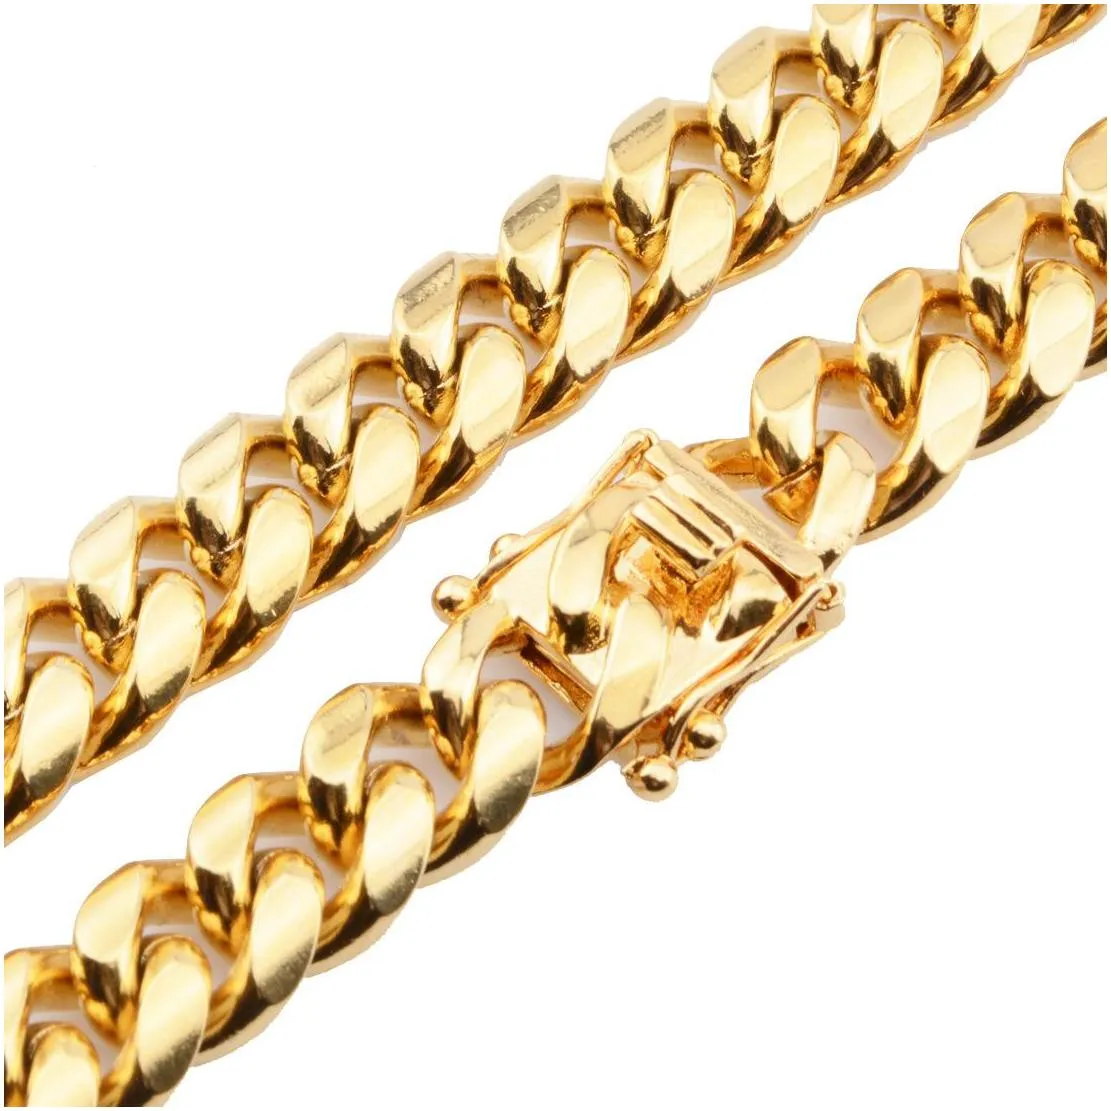 8 10 12 14 16 18mm 1830inches  cuban link gold chain hip hop jewelry thick stainless steel necklace277p6868481